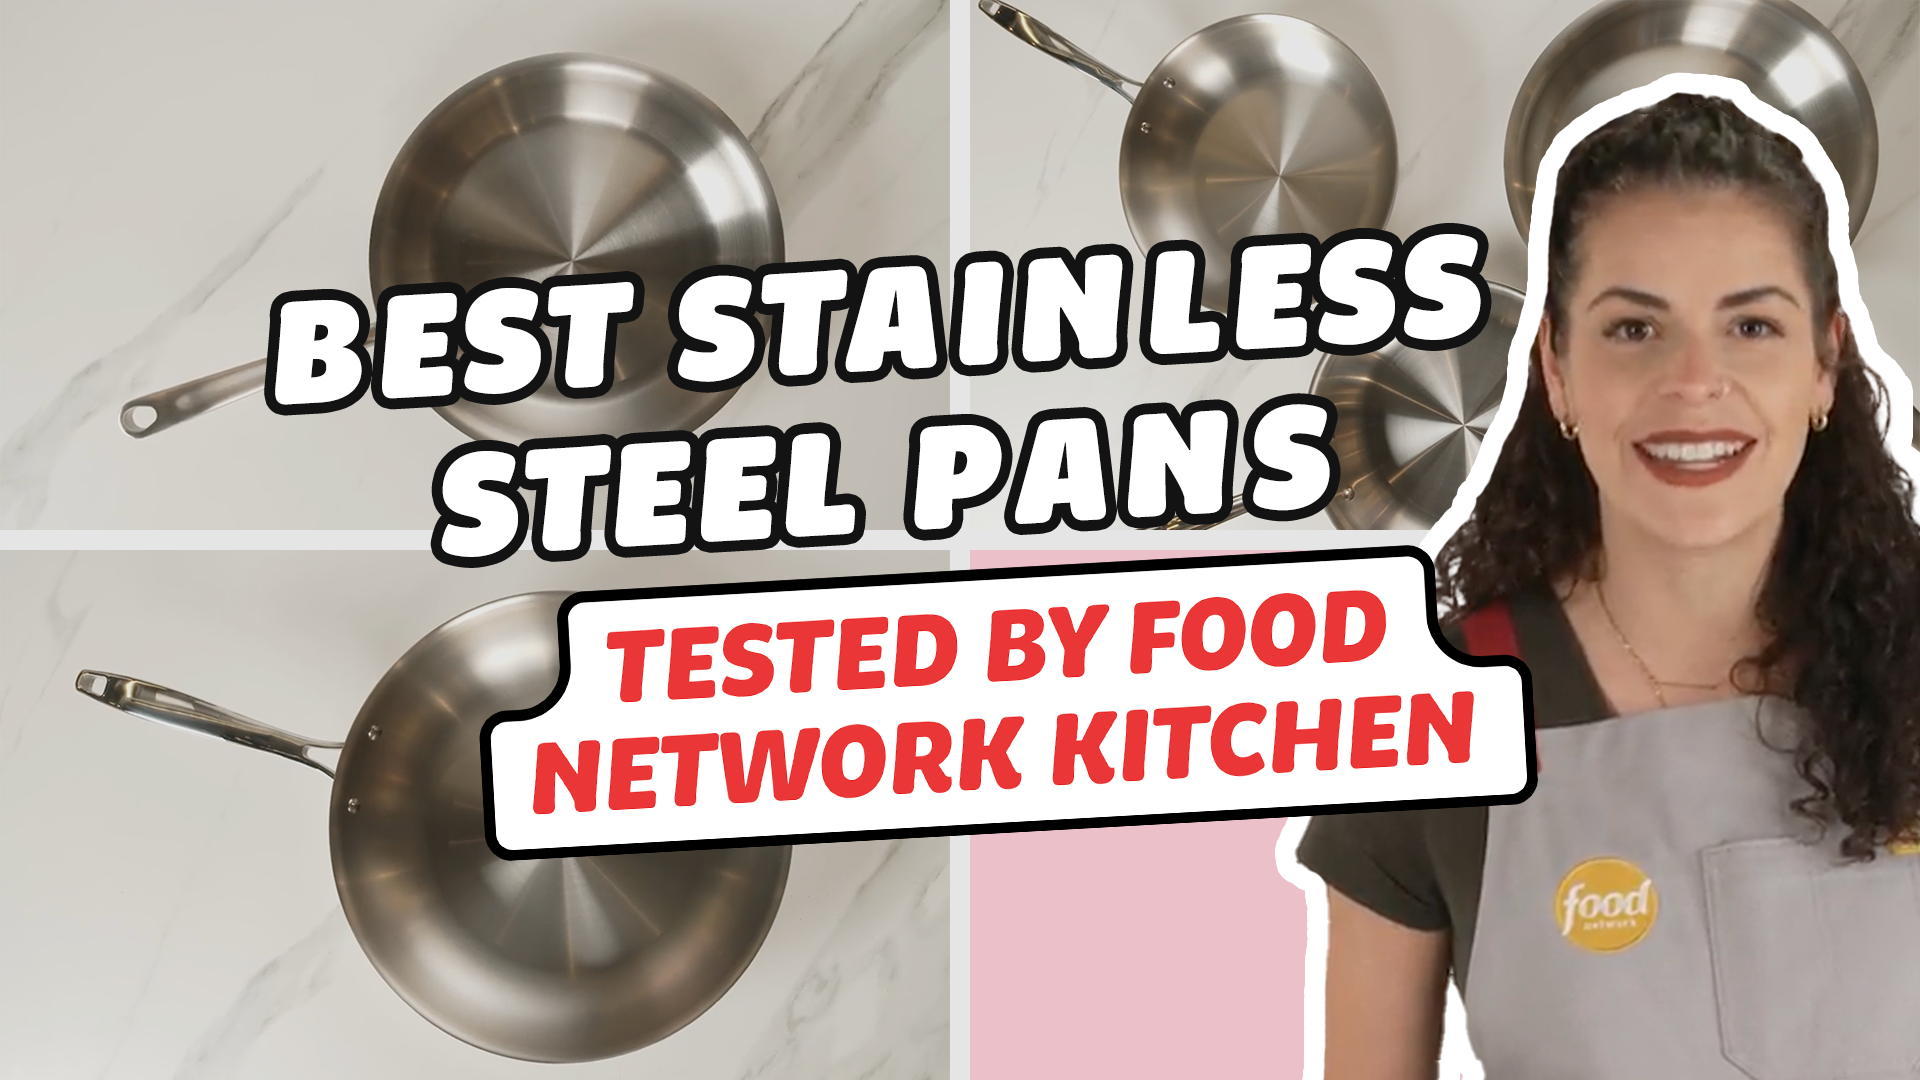 5 Best Stainless Steel Cookware Sets 2024 Reviewed, Shopping : Food Network